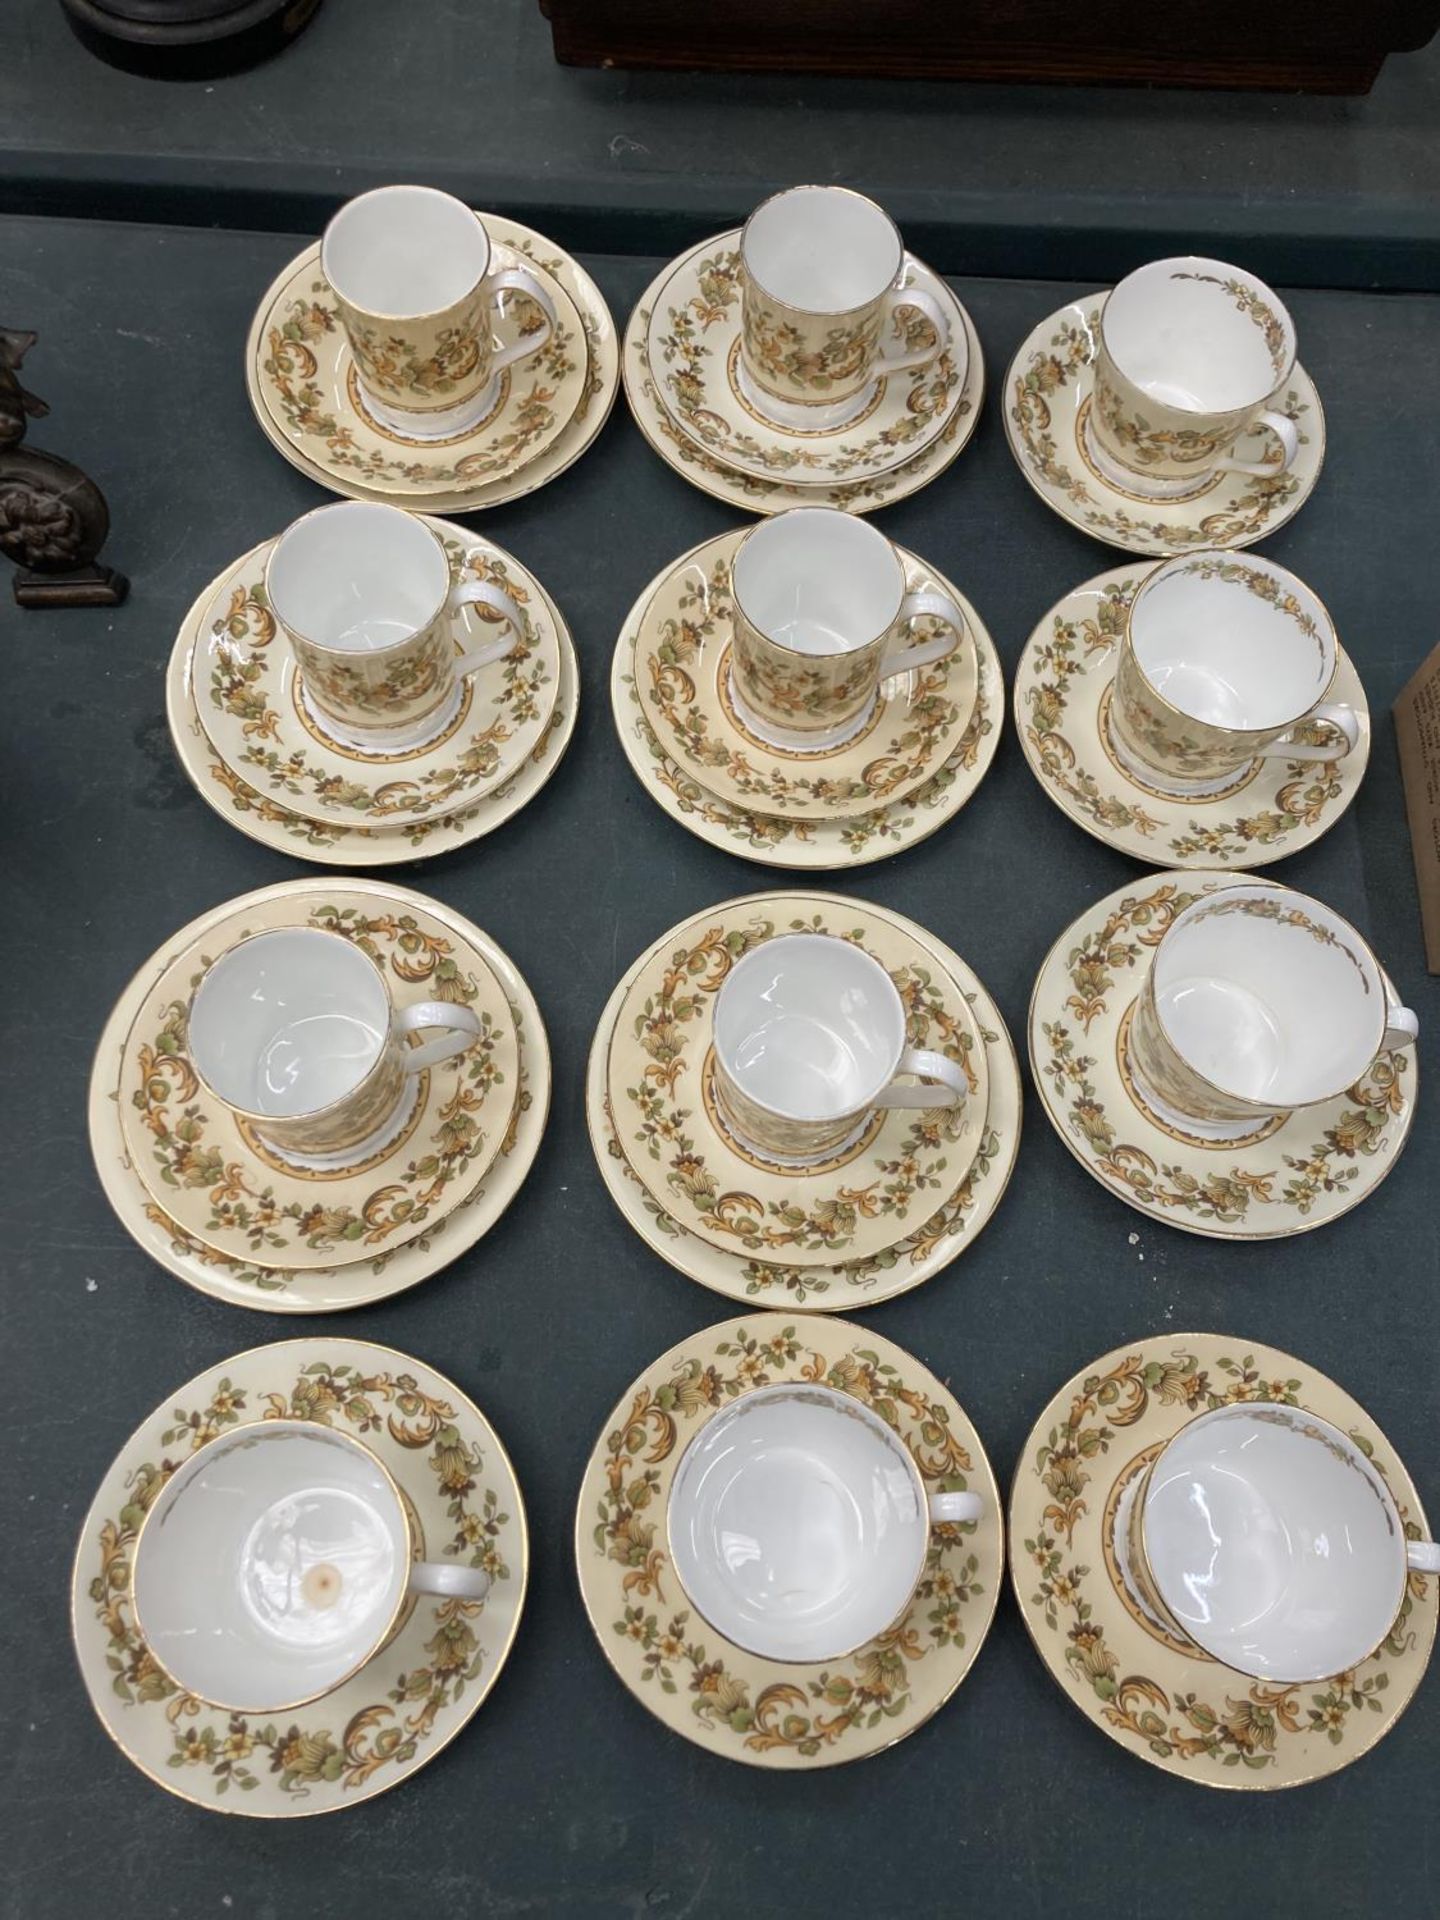 A QUNTITY OF ELIZABETHAN 'AUTUMN SONG' CHINA CUPS, SAUCERS AND PLATES - Image 3 of 4